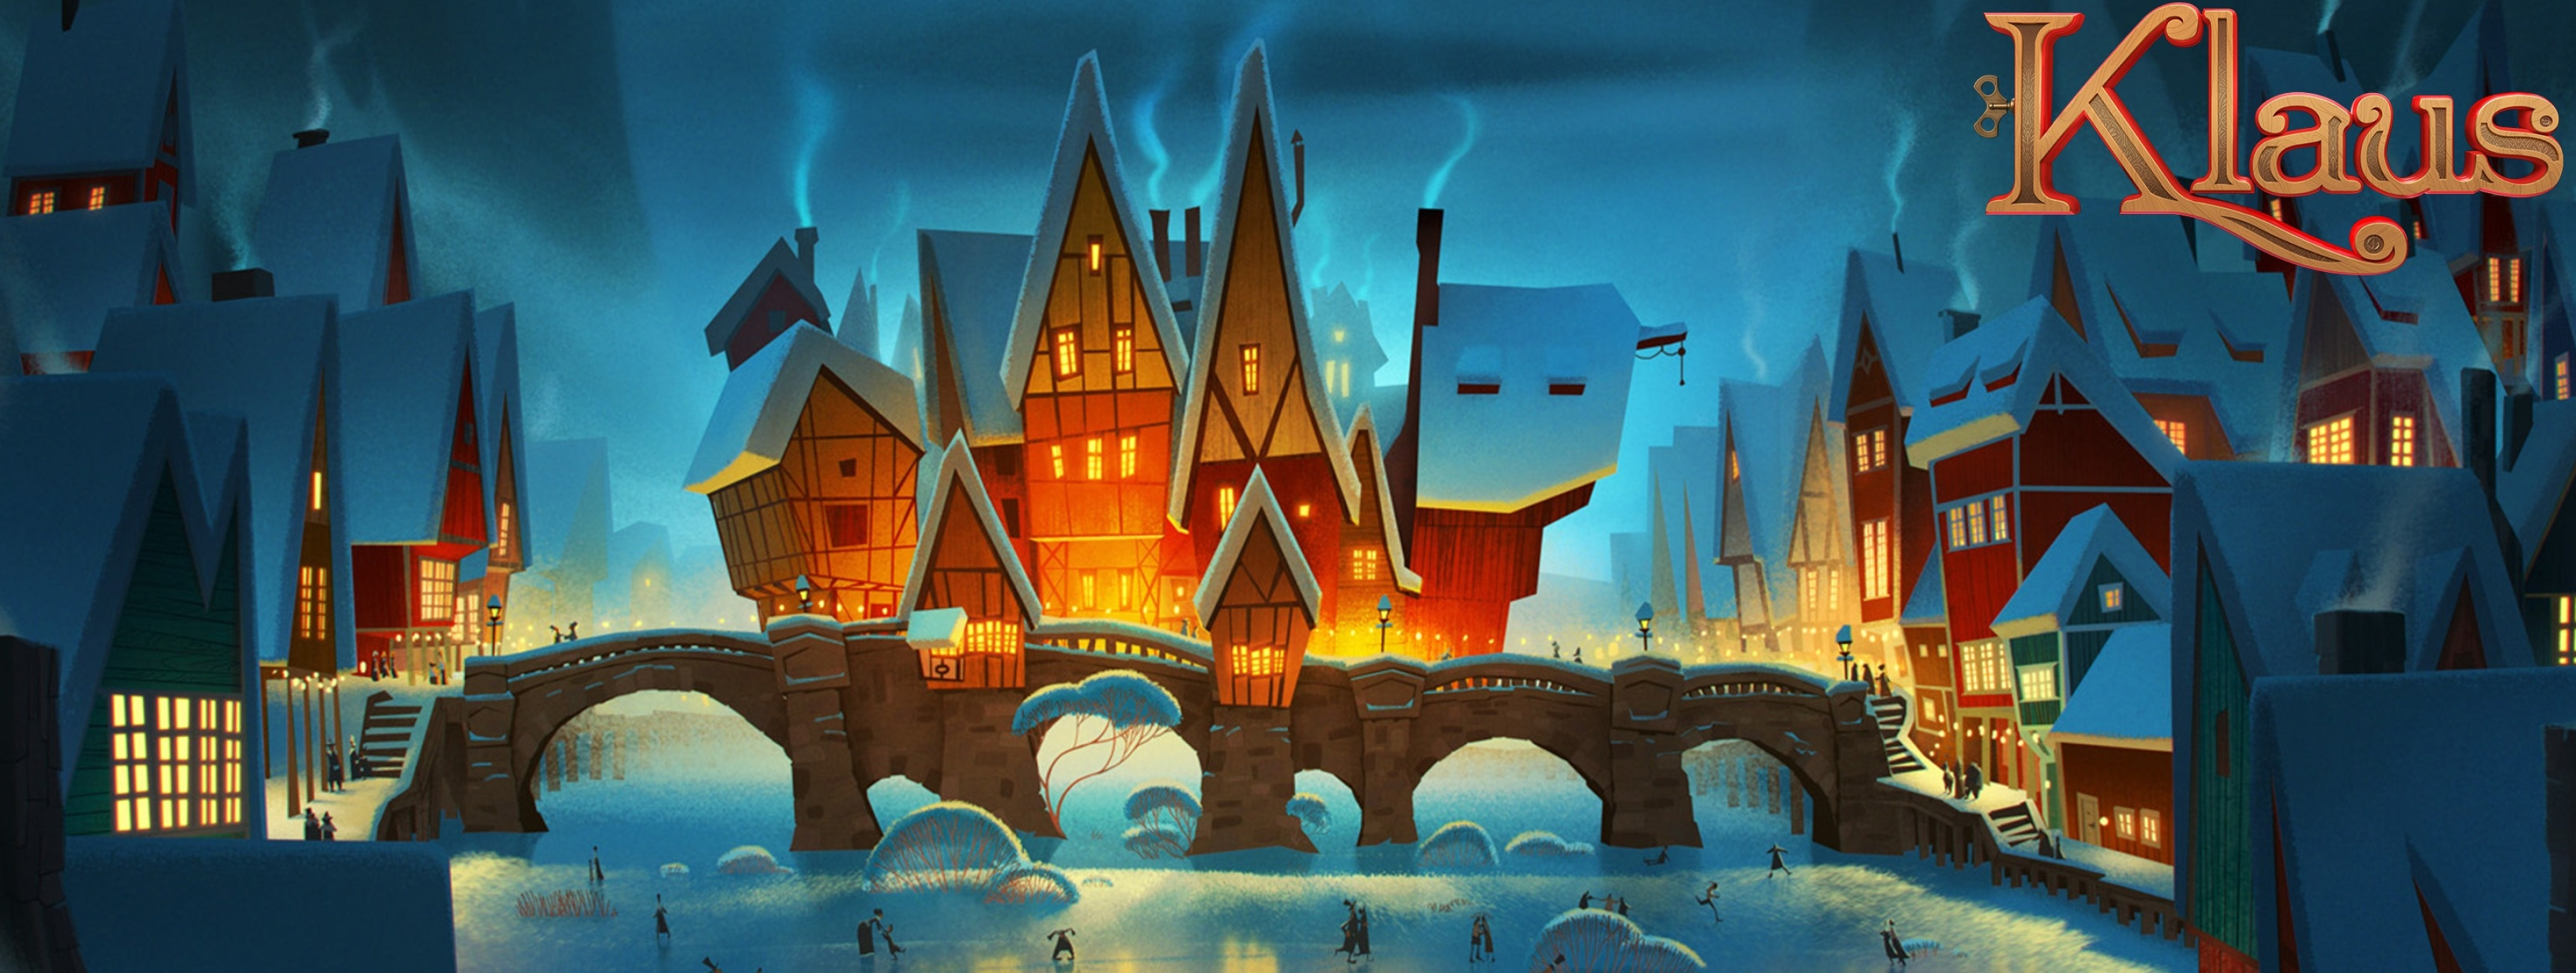 Klaus movie wallpapers, High-quality illustrations, Animated film, Christmas, 3600x1360 Dual Screen Desktop